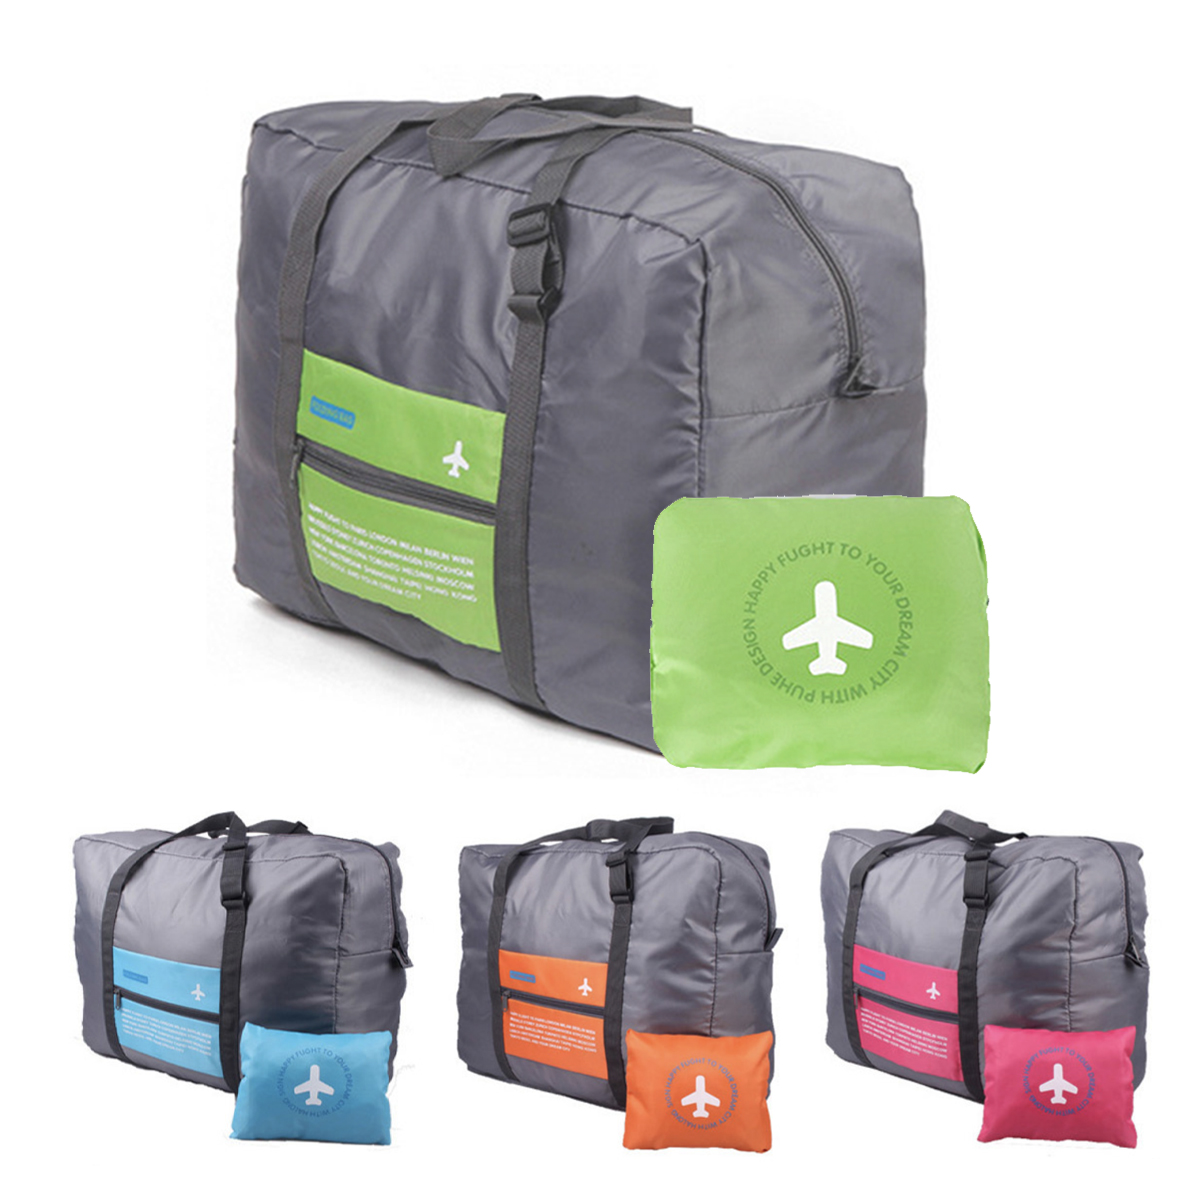 home 365 foldable travel bag with removable compartments